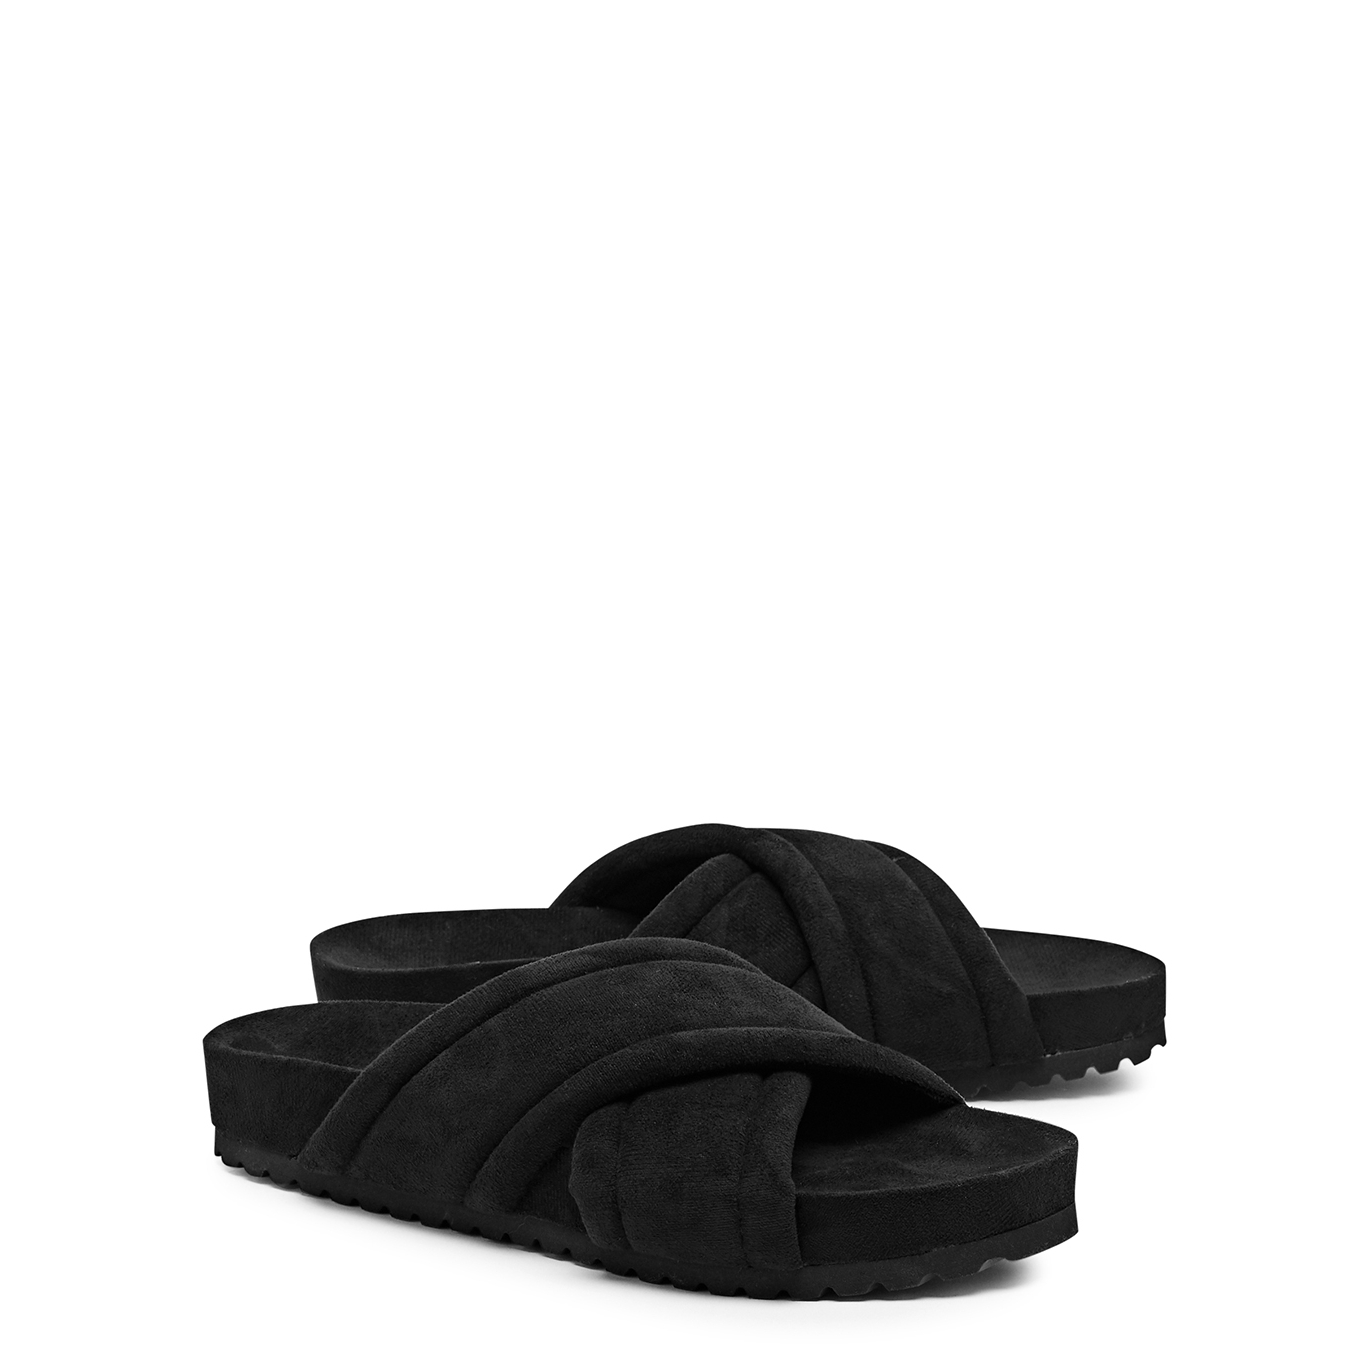 VARLEY RONELY QUILTED FAUX SUEDE SLIDERS